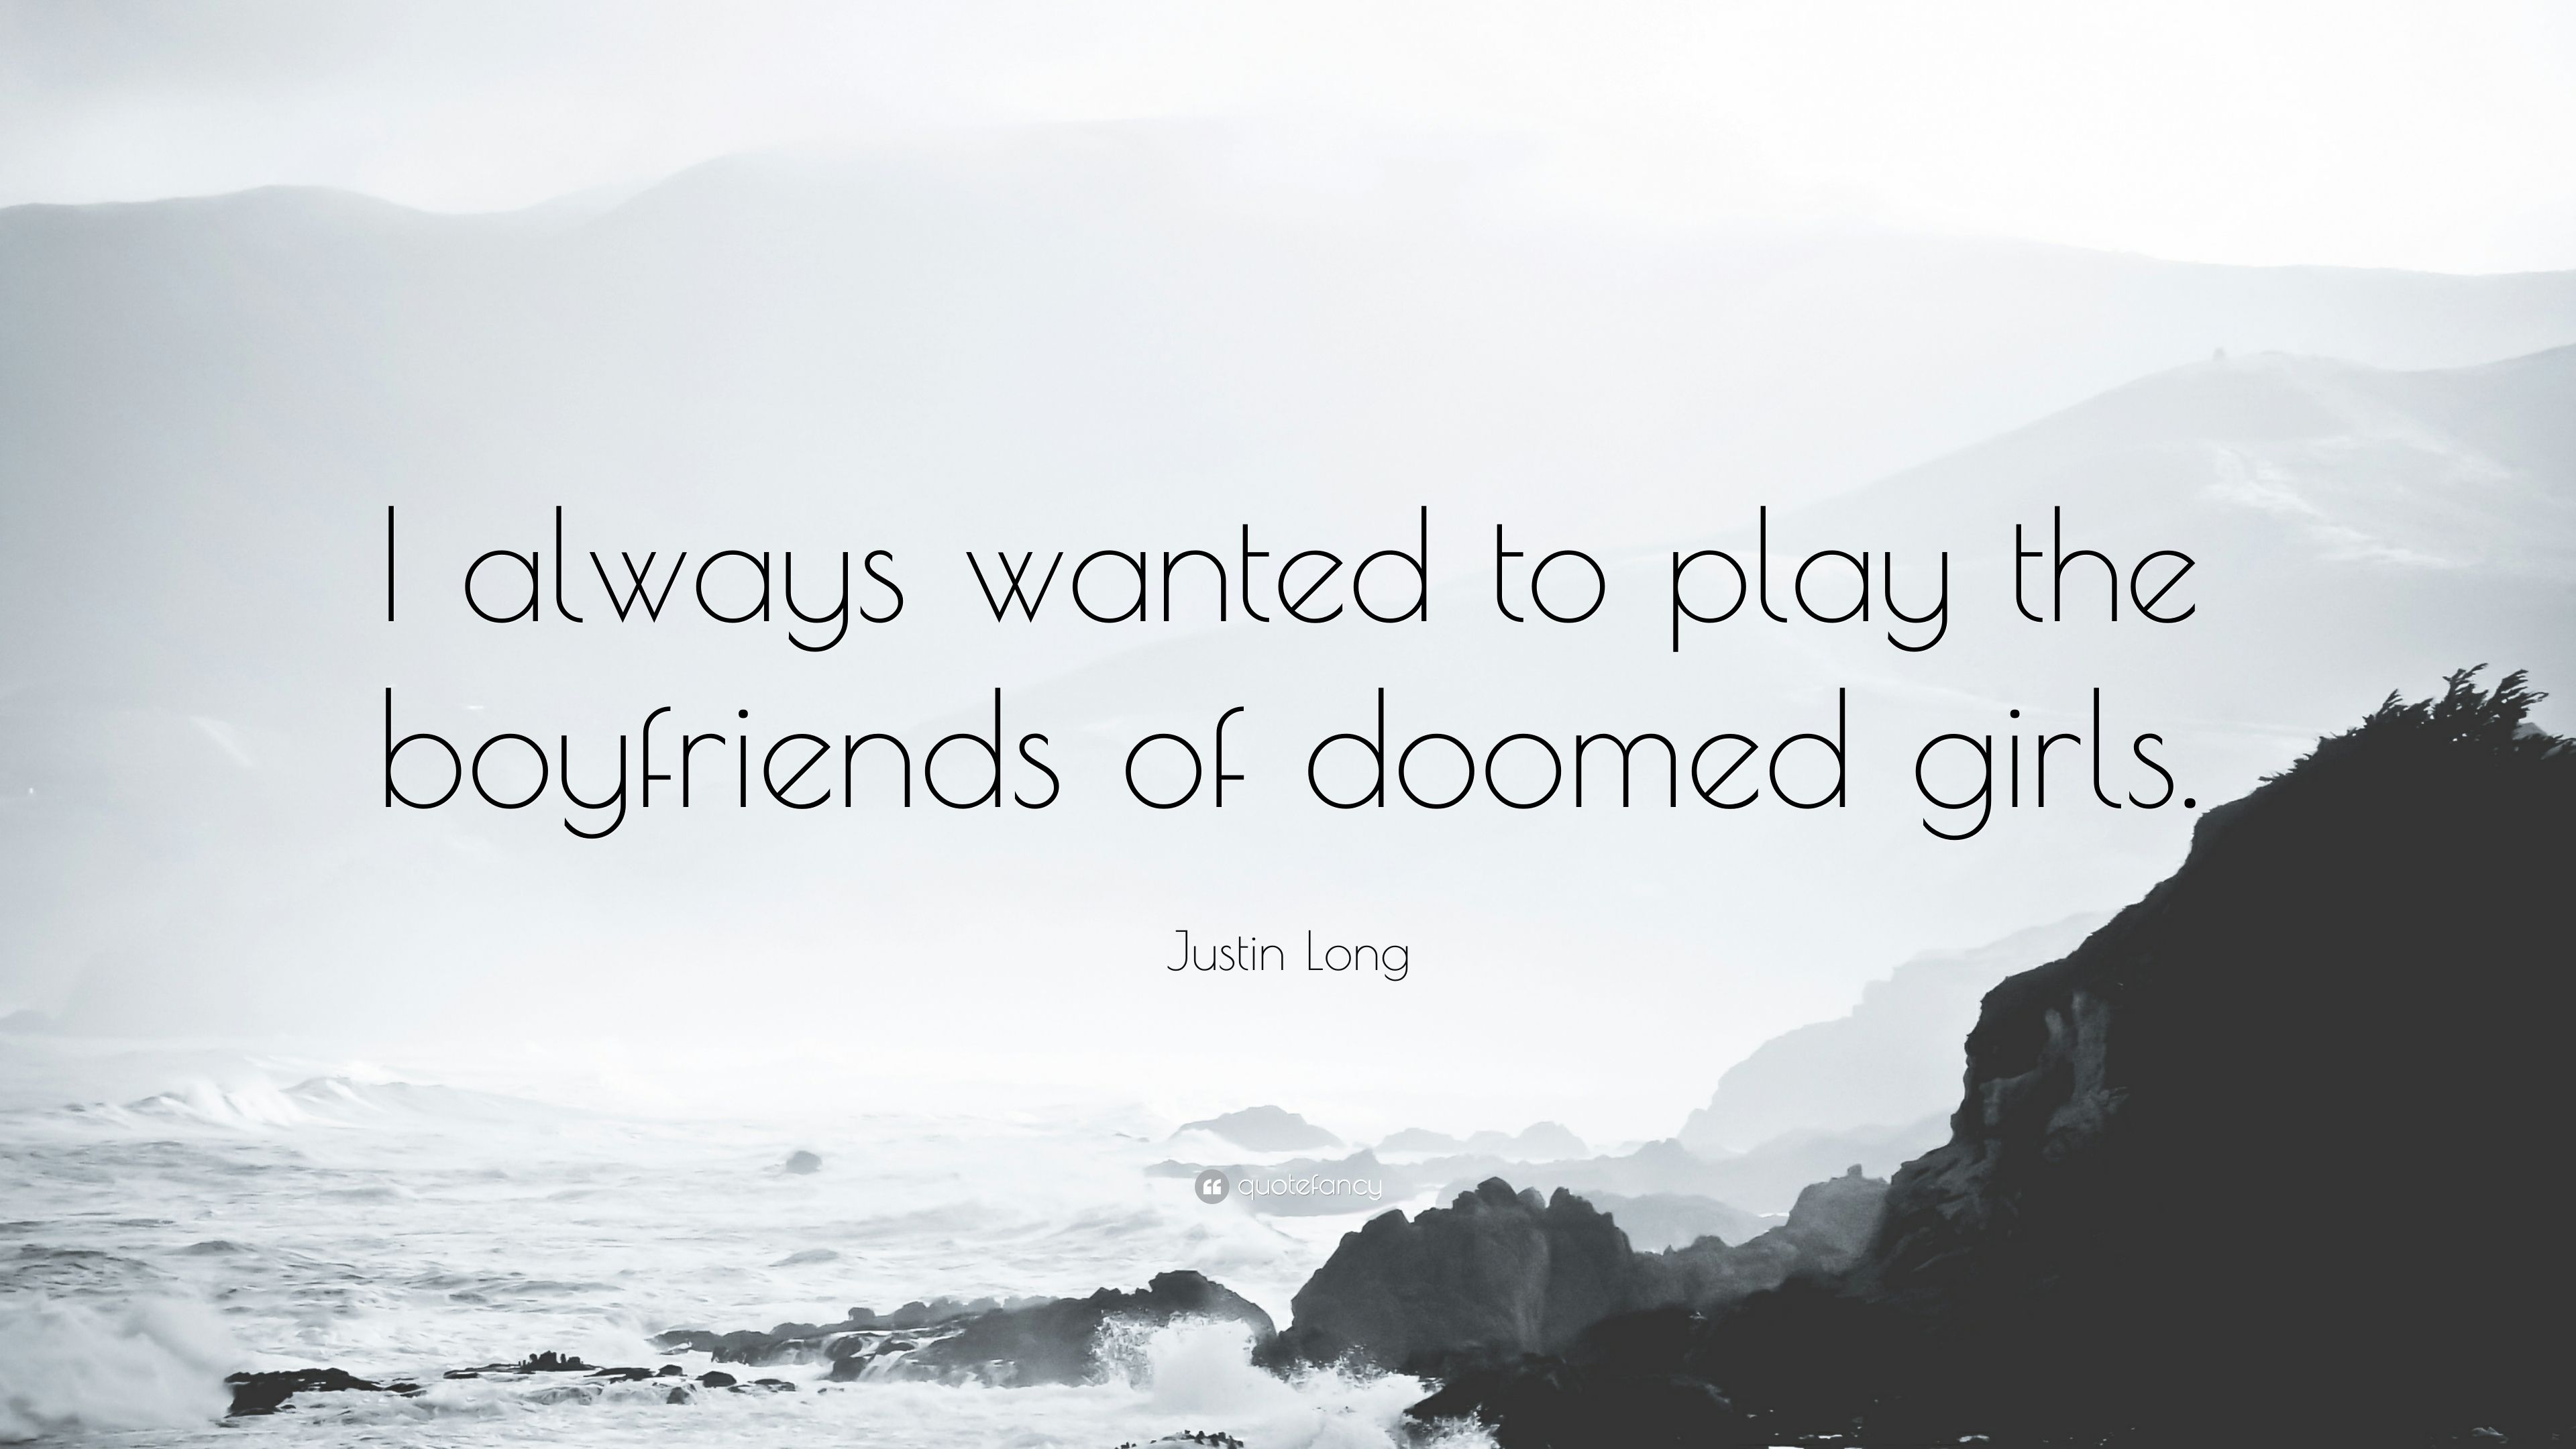 Justin Long Quote: “I always wanted to play the boyfriends of doomed girls.” (7 wallpaper)